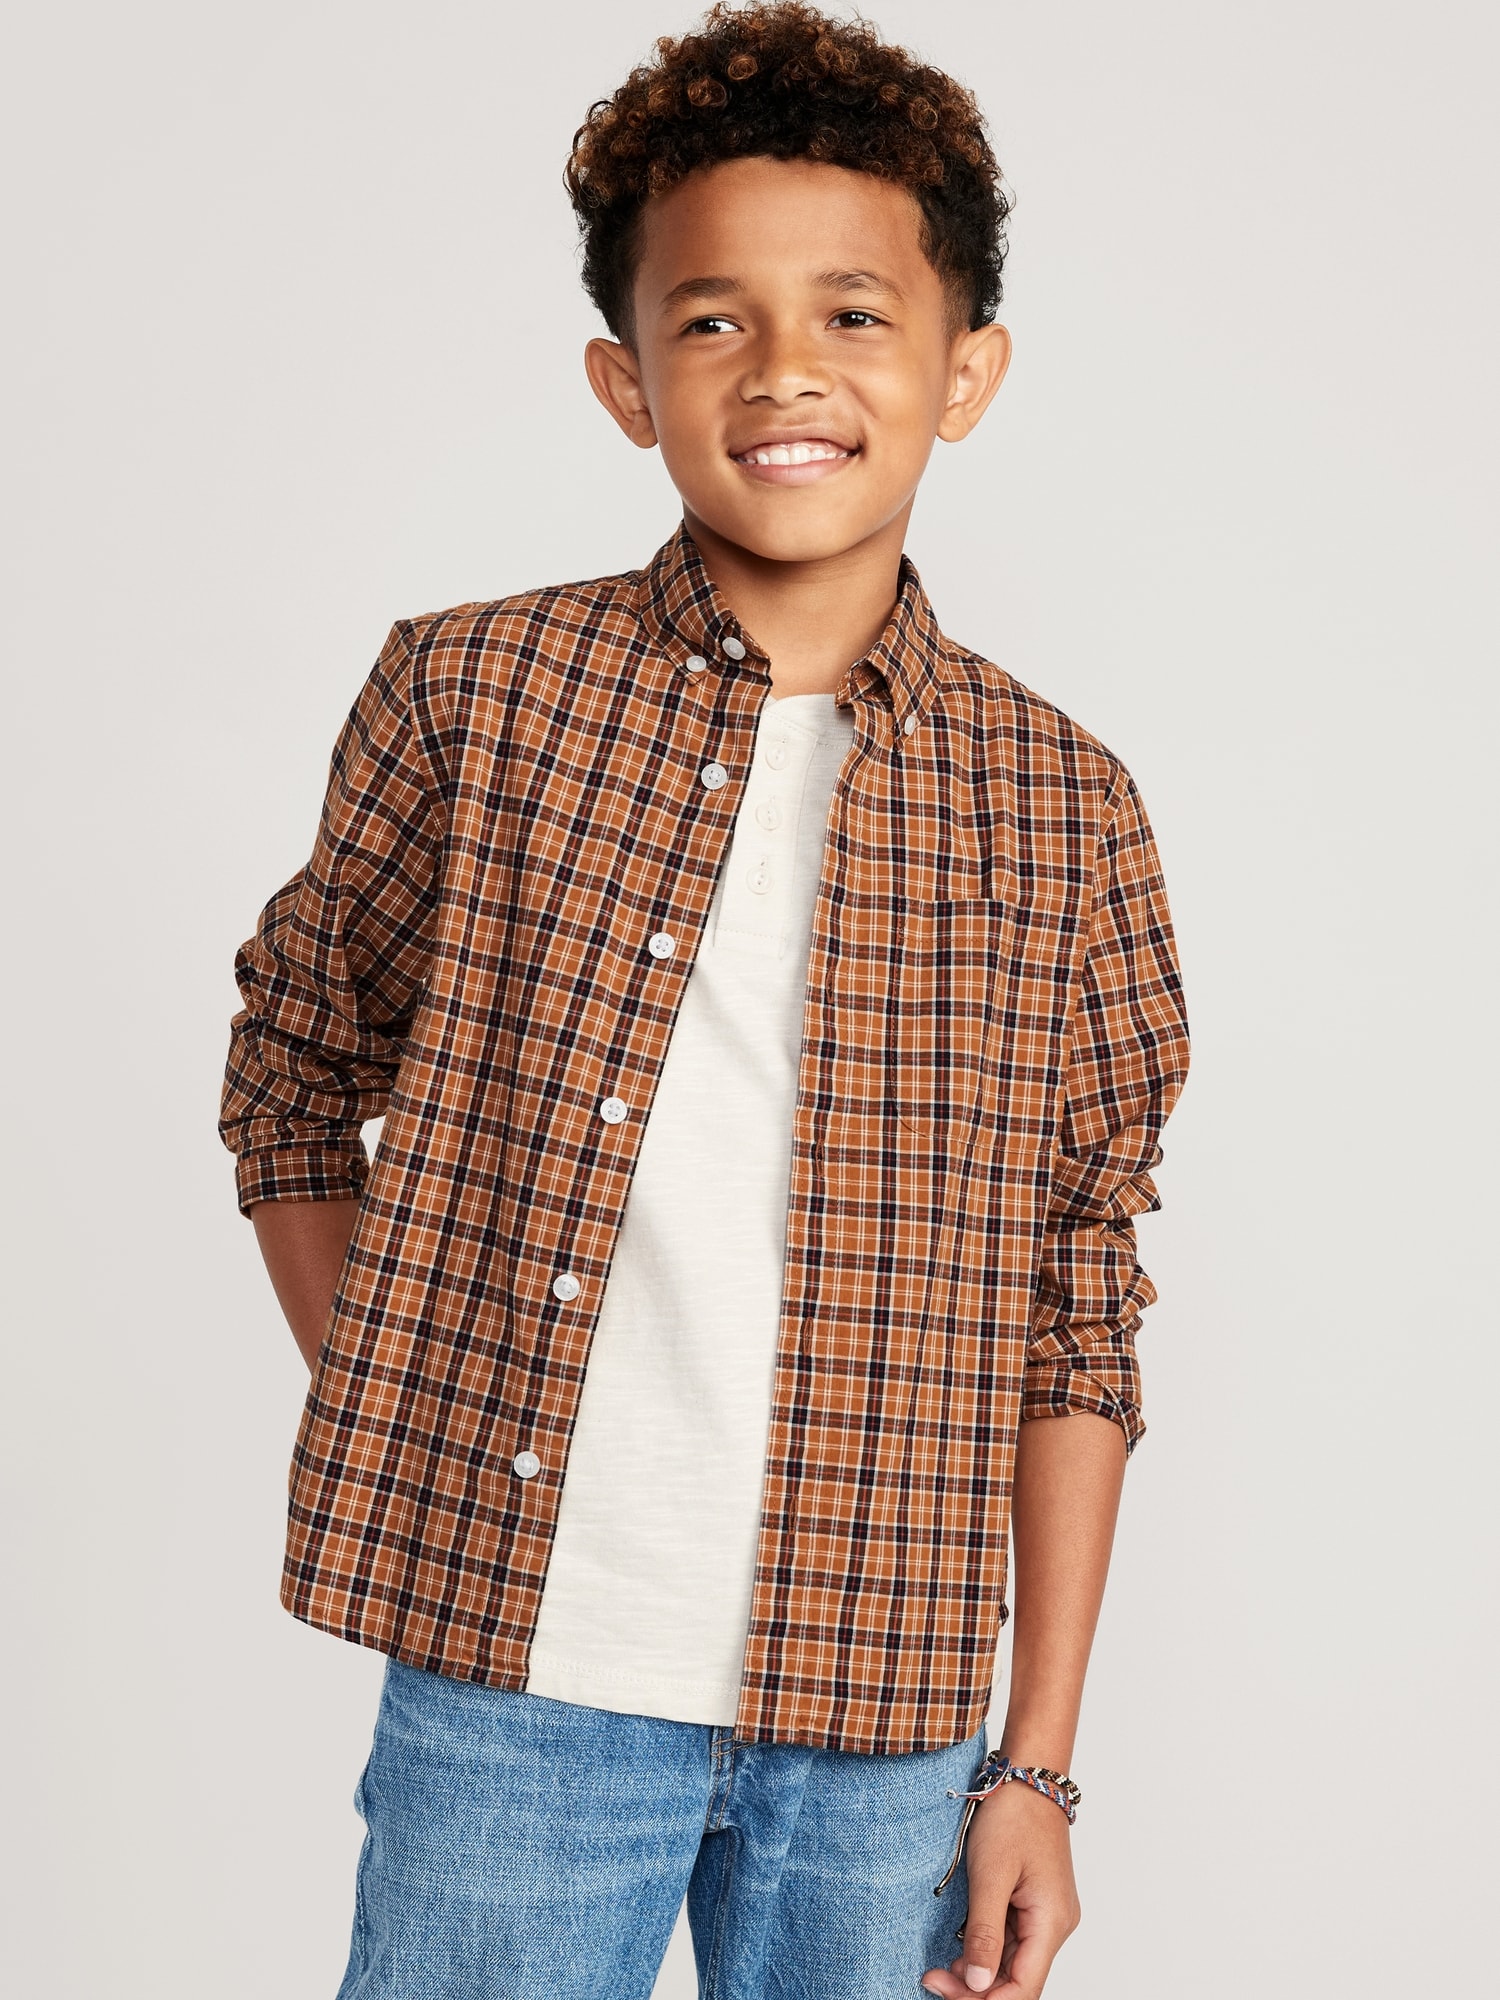 Old Navy Blue Grey Plaid LS Shirt Boys – Revived Clothing Exchange